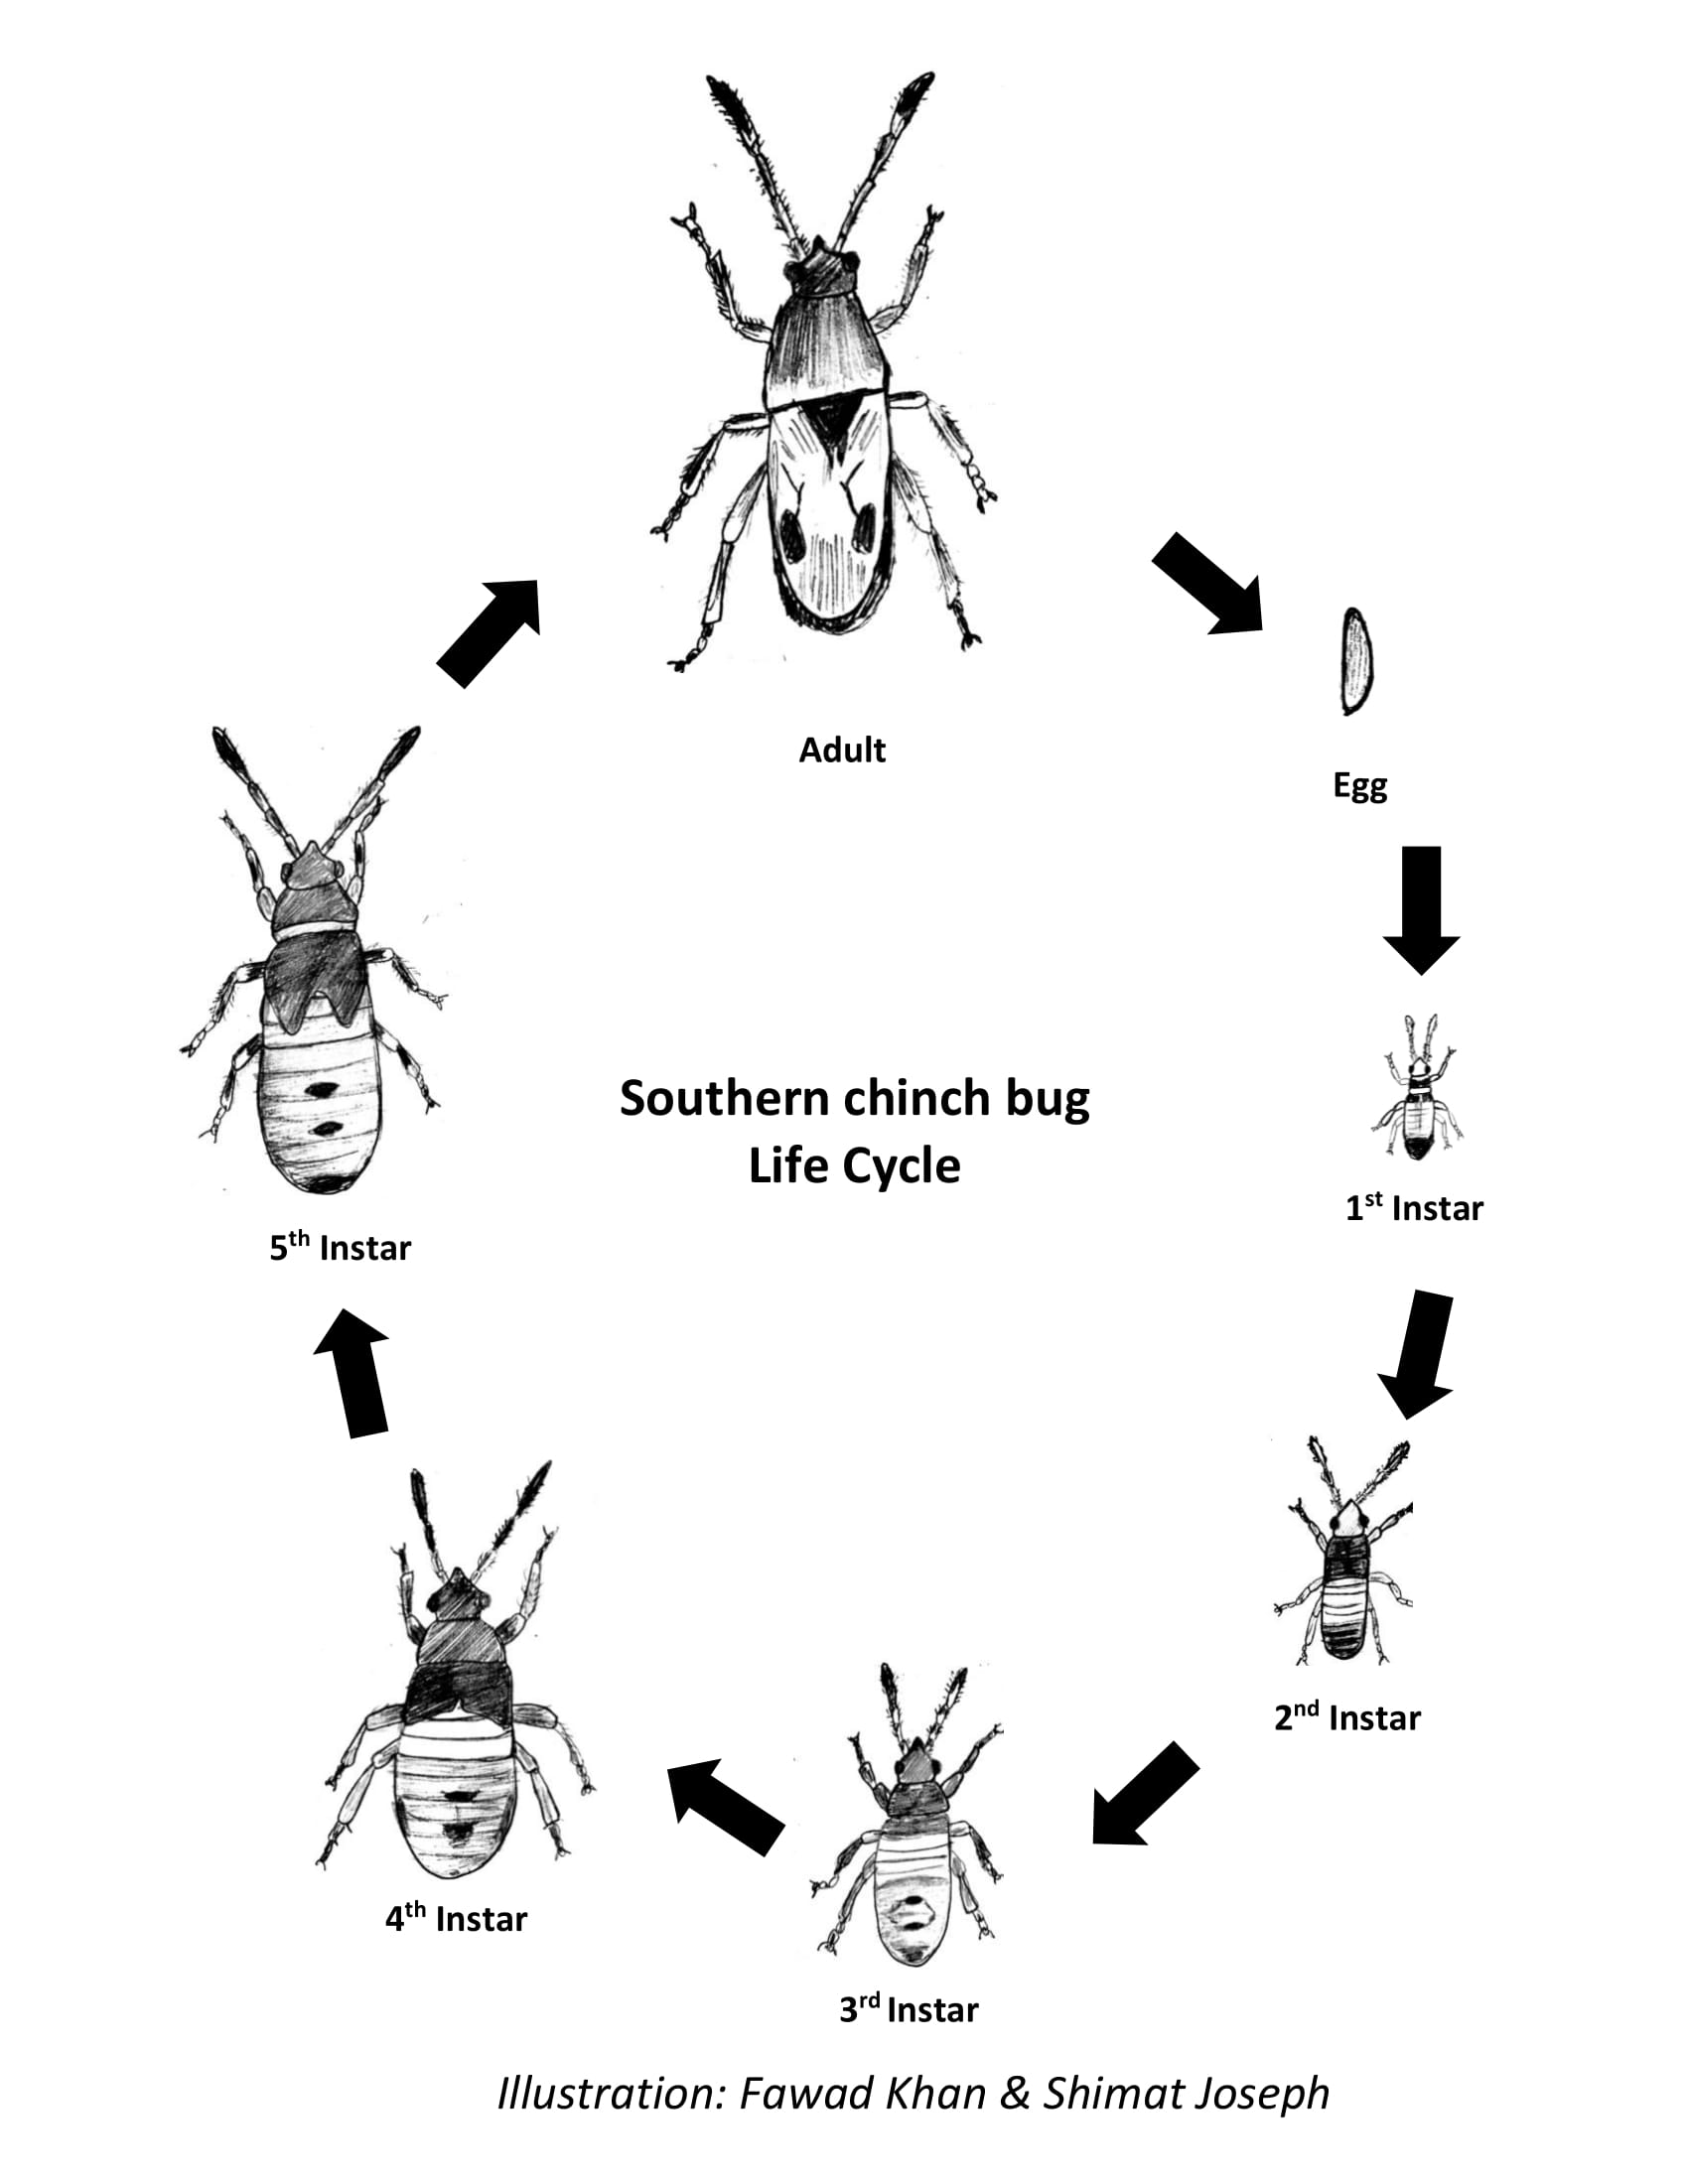 Southern chinch bug life cycle. Bugs go from egg through five larval instars to adults, then back to eggs. Illustration: Fawad Khan & Shimat Joseph